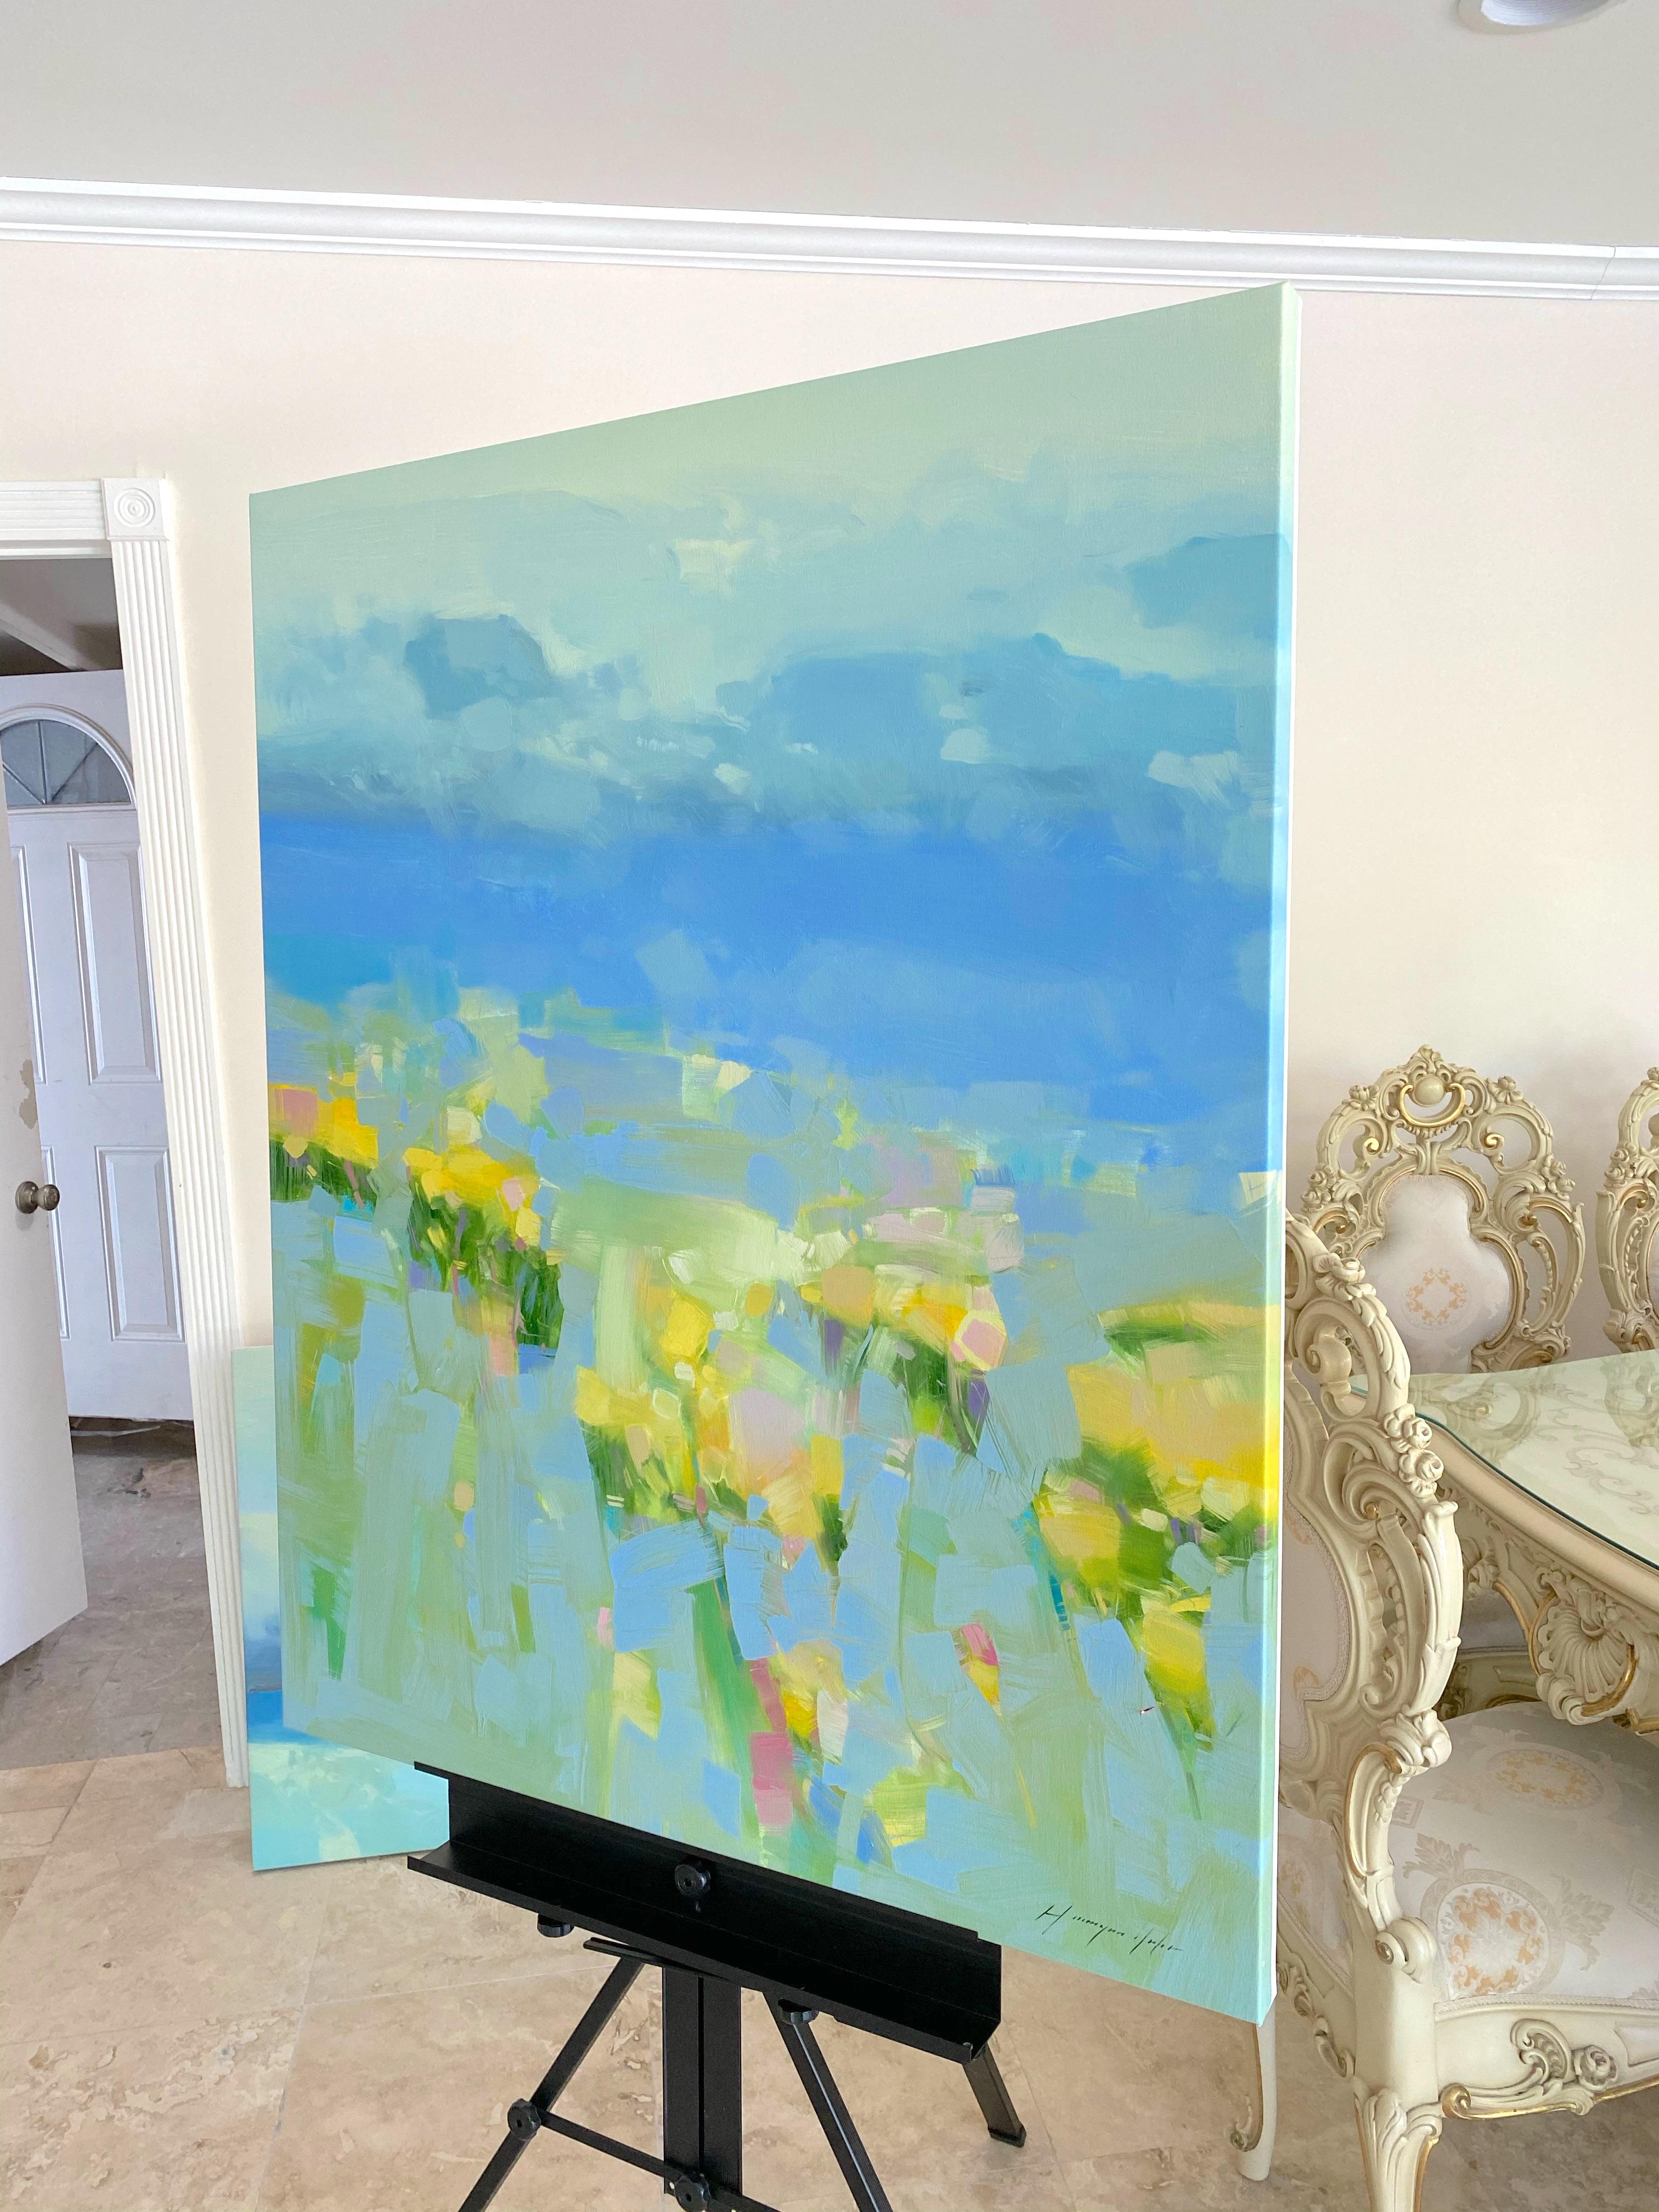 Artist: Vahe Yeremyan 
Work: Original Oil Painting, Handmade Artwork, One of a Kind 
Medium: Oil on Canvas 
Year: 2021
Style: Impressionism, 
Subject: Blossom Spring,
Size: 43